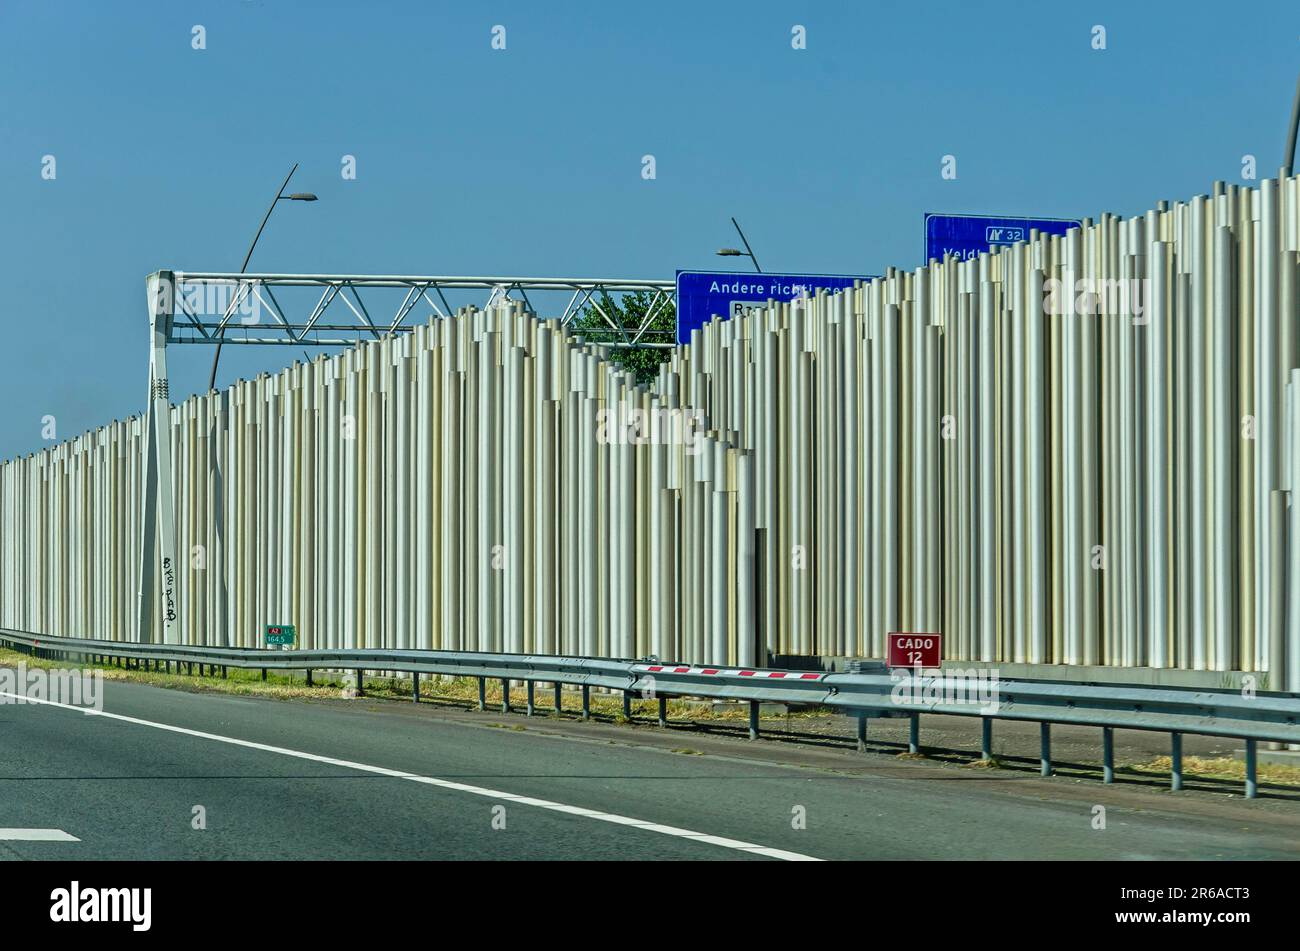 Eindhoven, The Netherlands, May 27, 2023: view from the highway towards the hi tech appearance of a sound barrier made of metallic perforated tubes Stock Photo